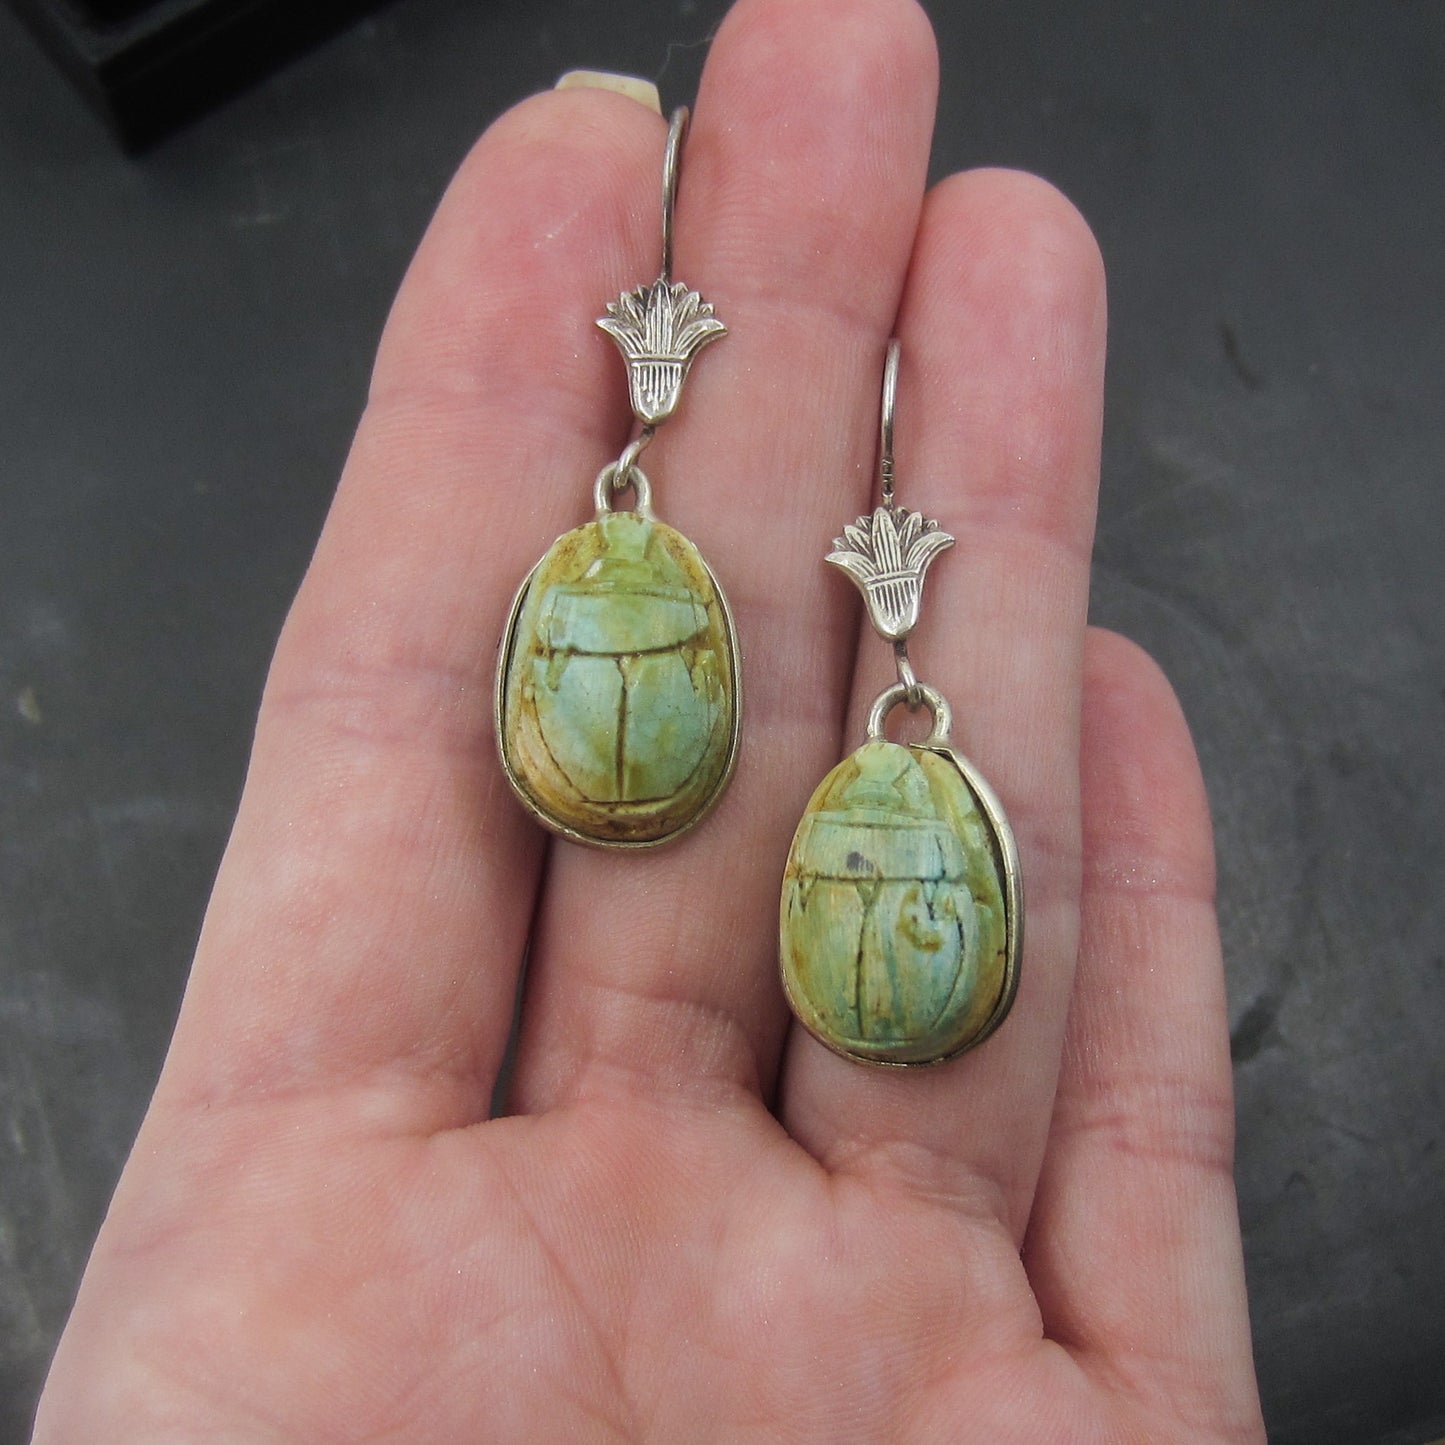 SOLD--Vintage Egyptian Revival Faience Scarab Earrings Silver c. 1970